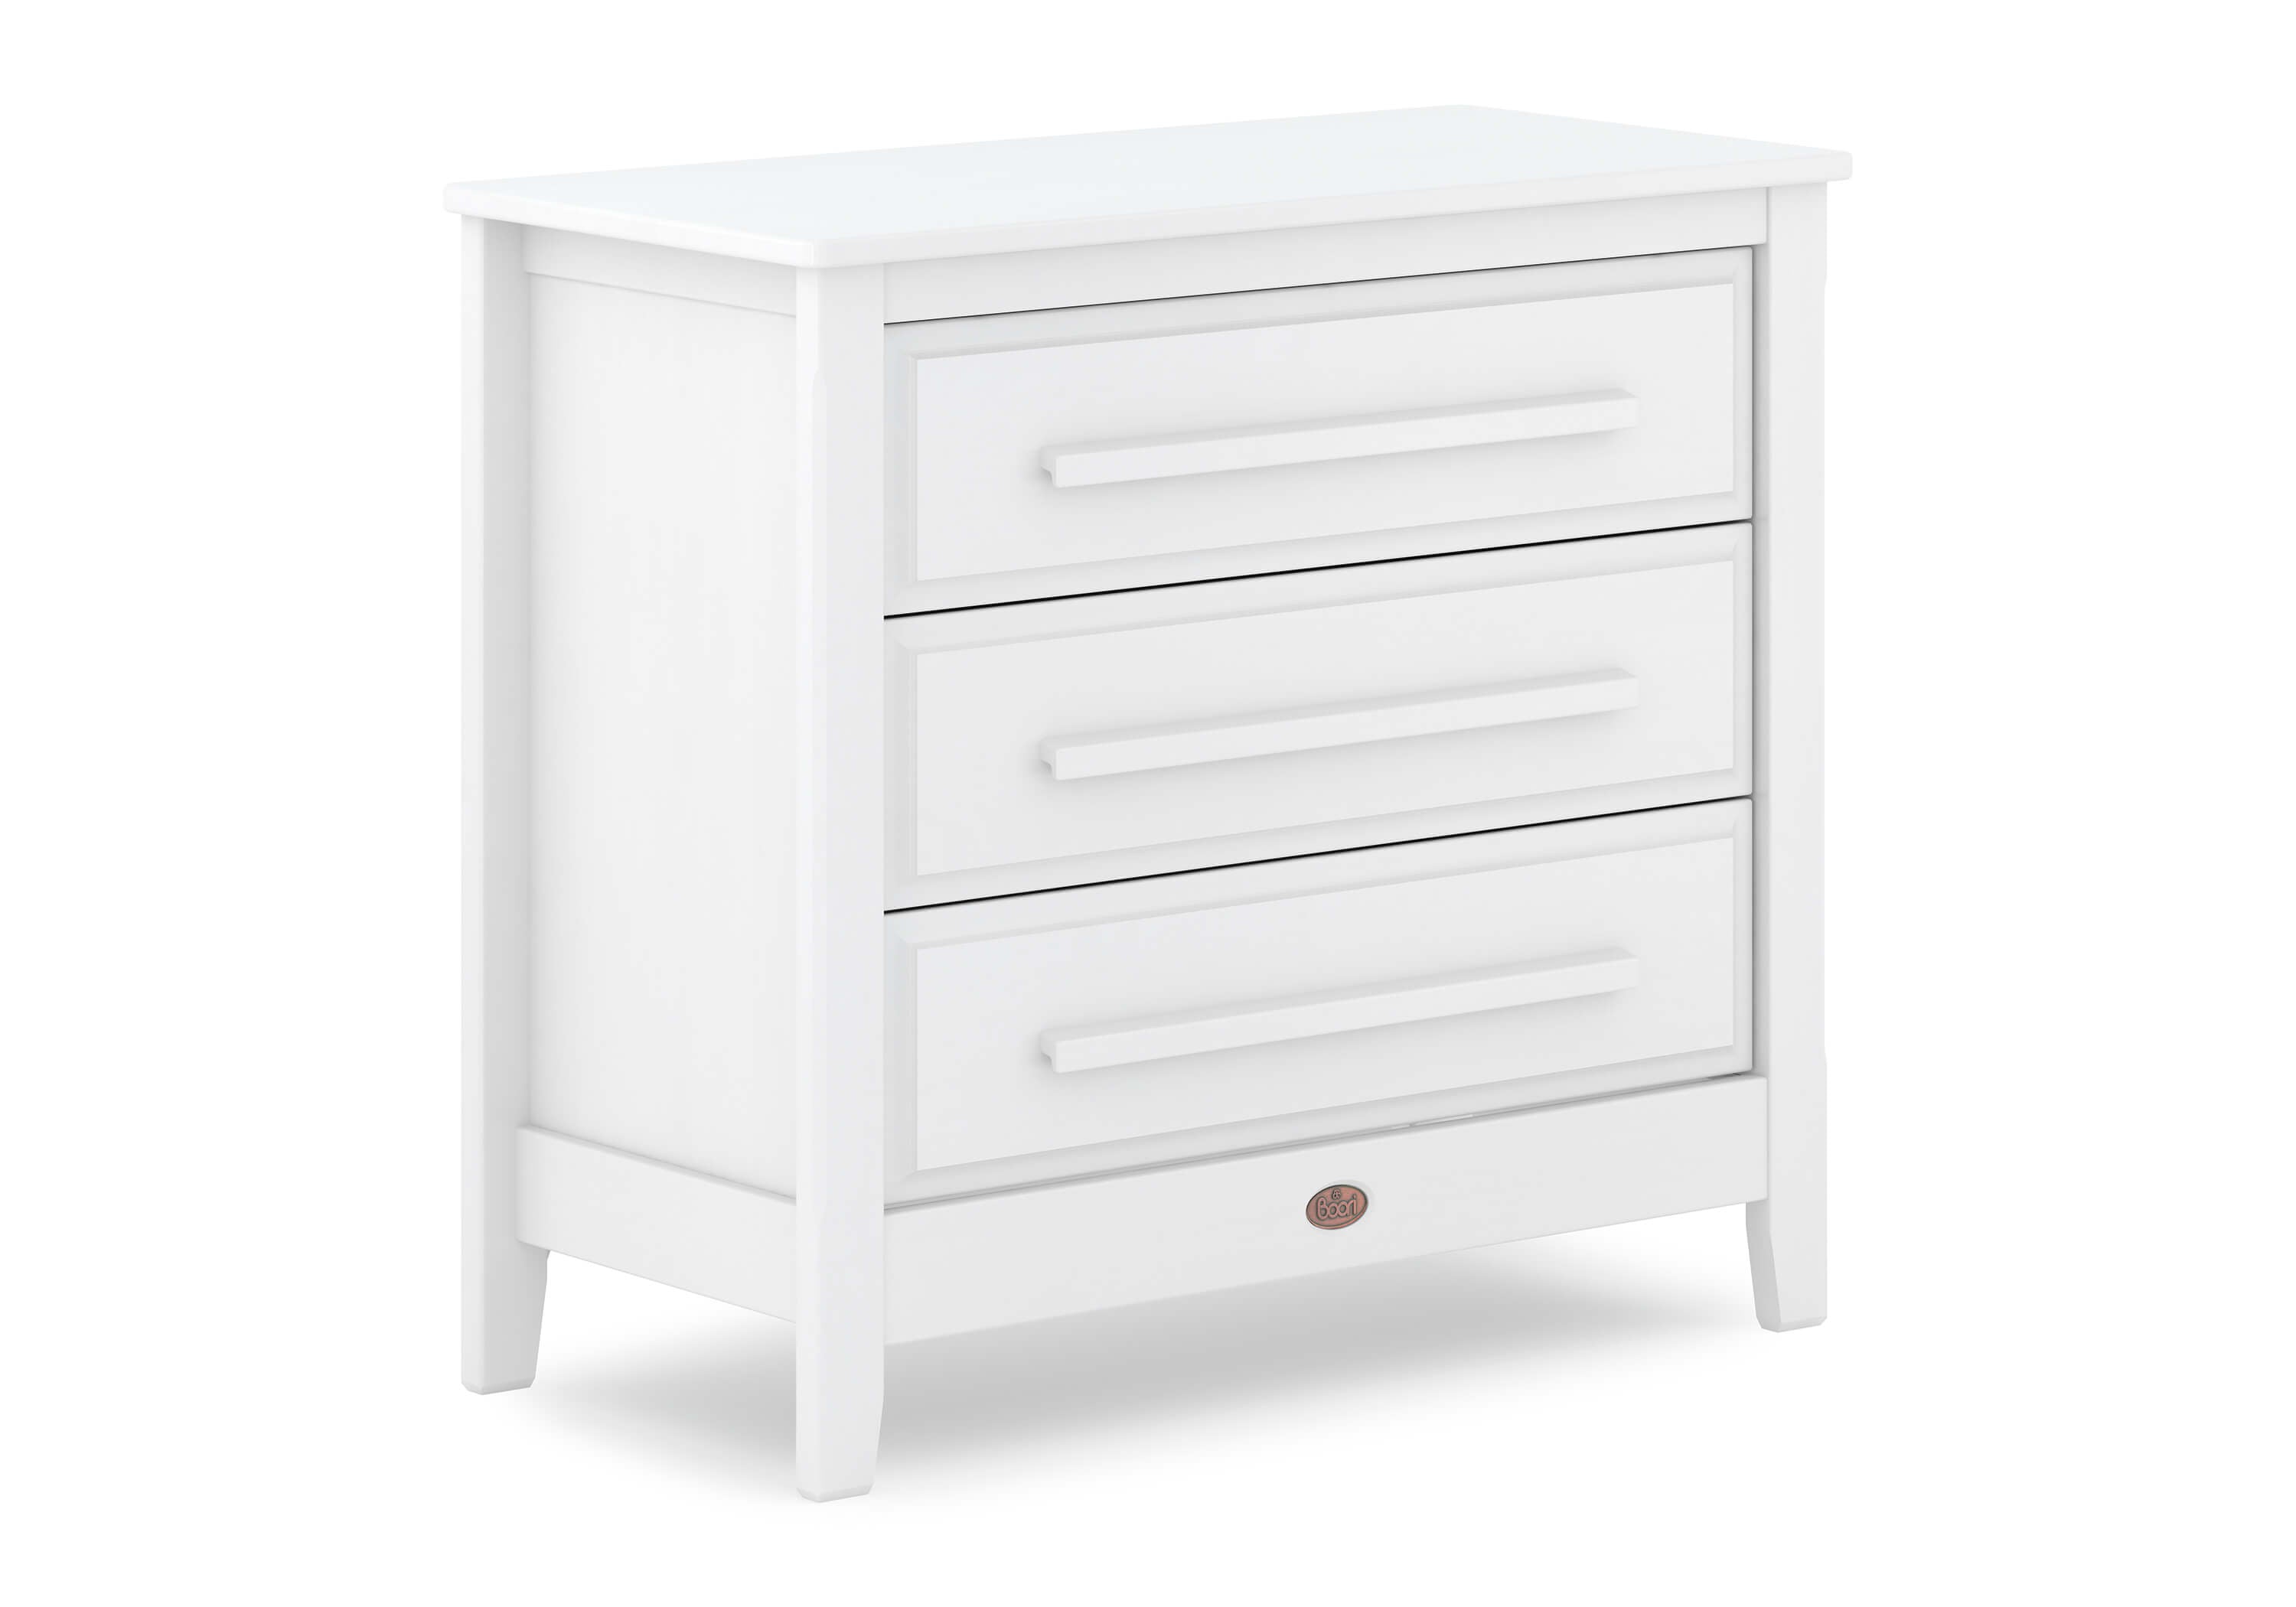 Boori Linear Chest of Drawers - White